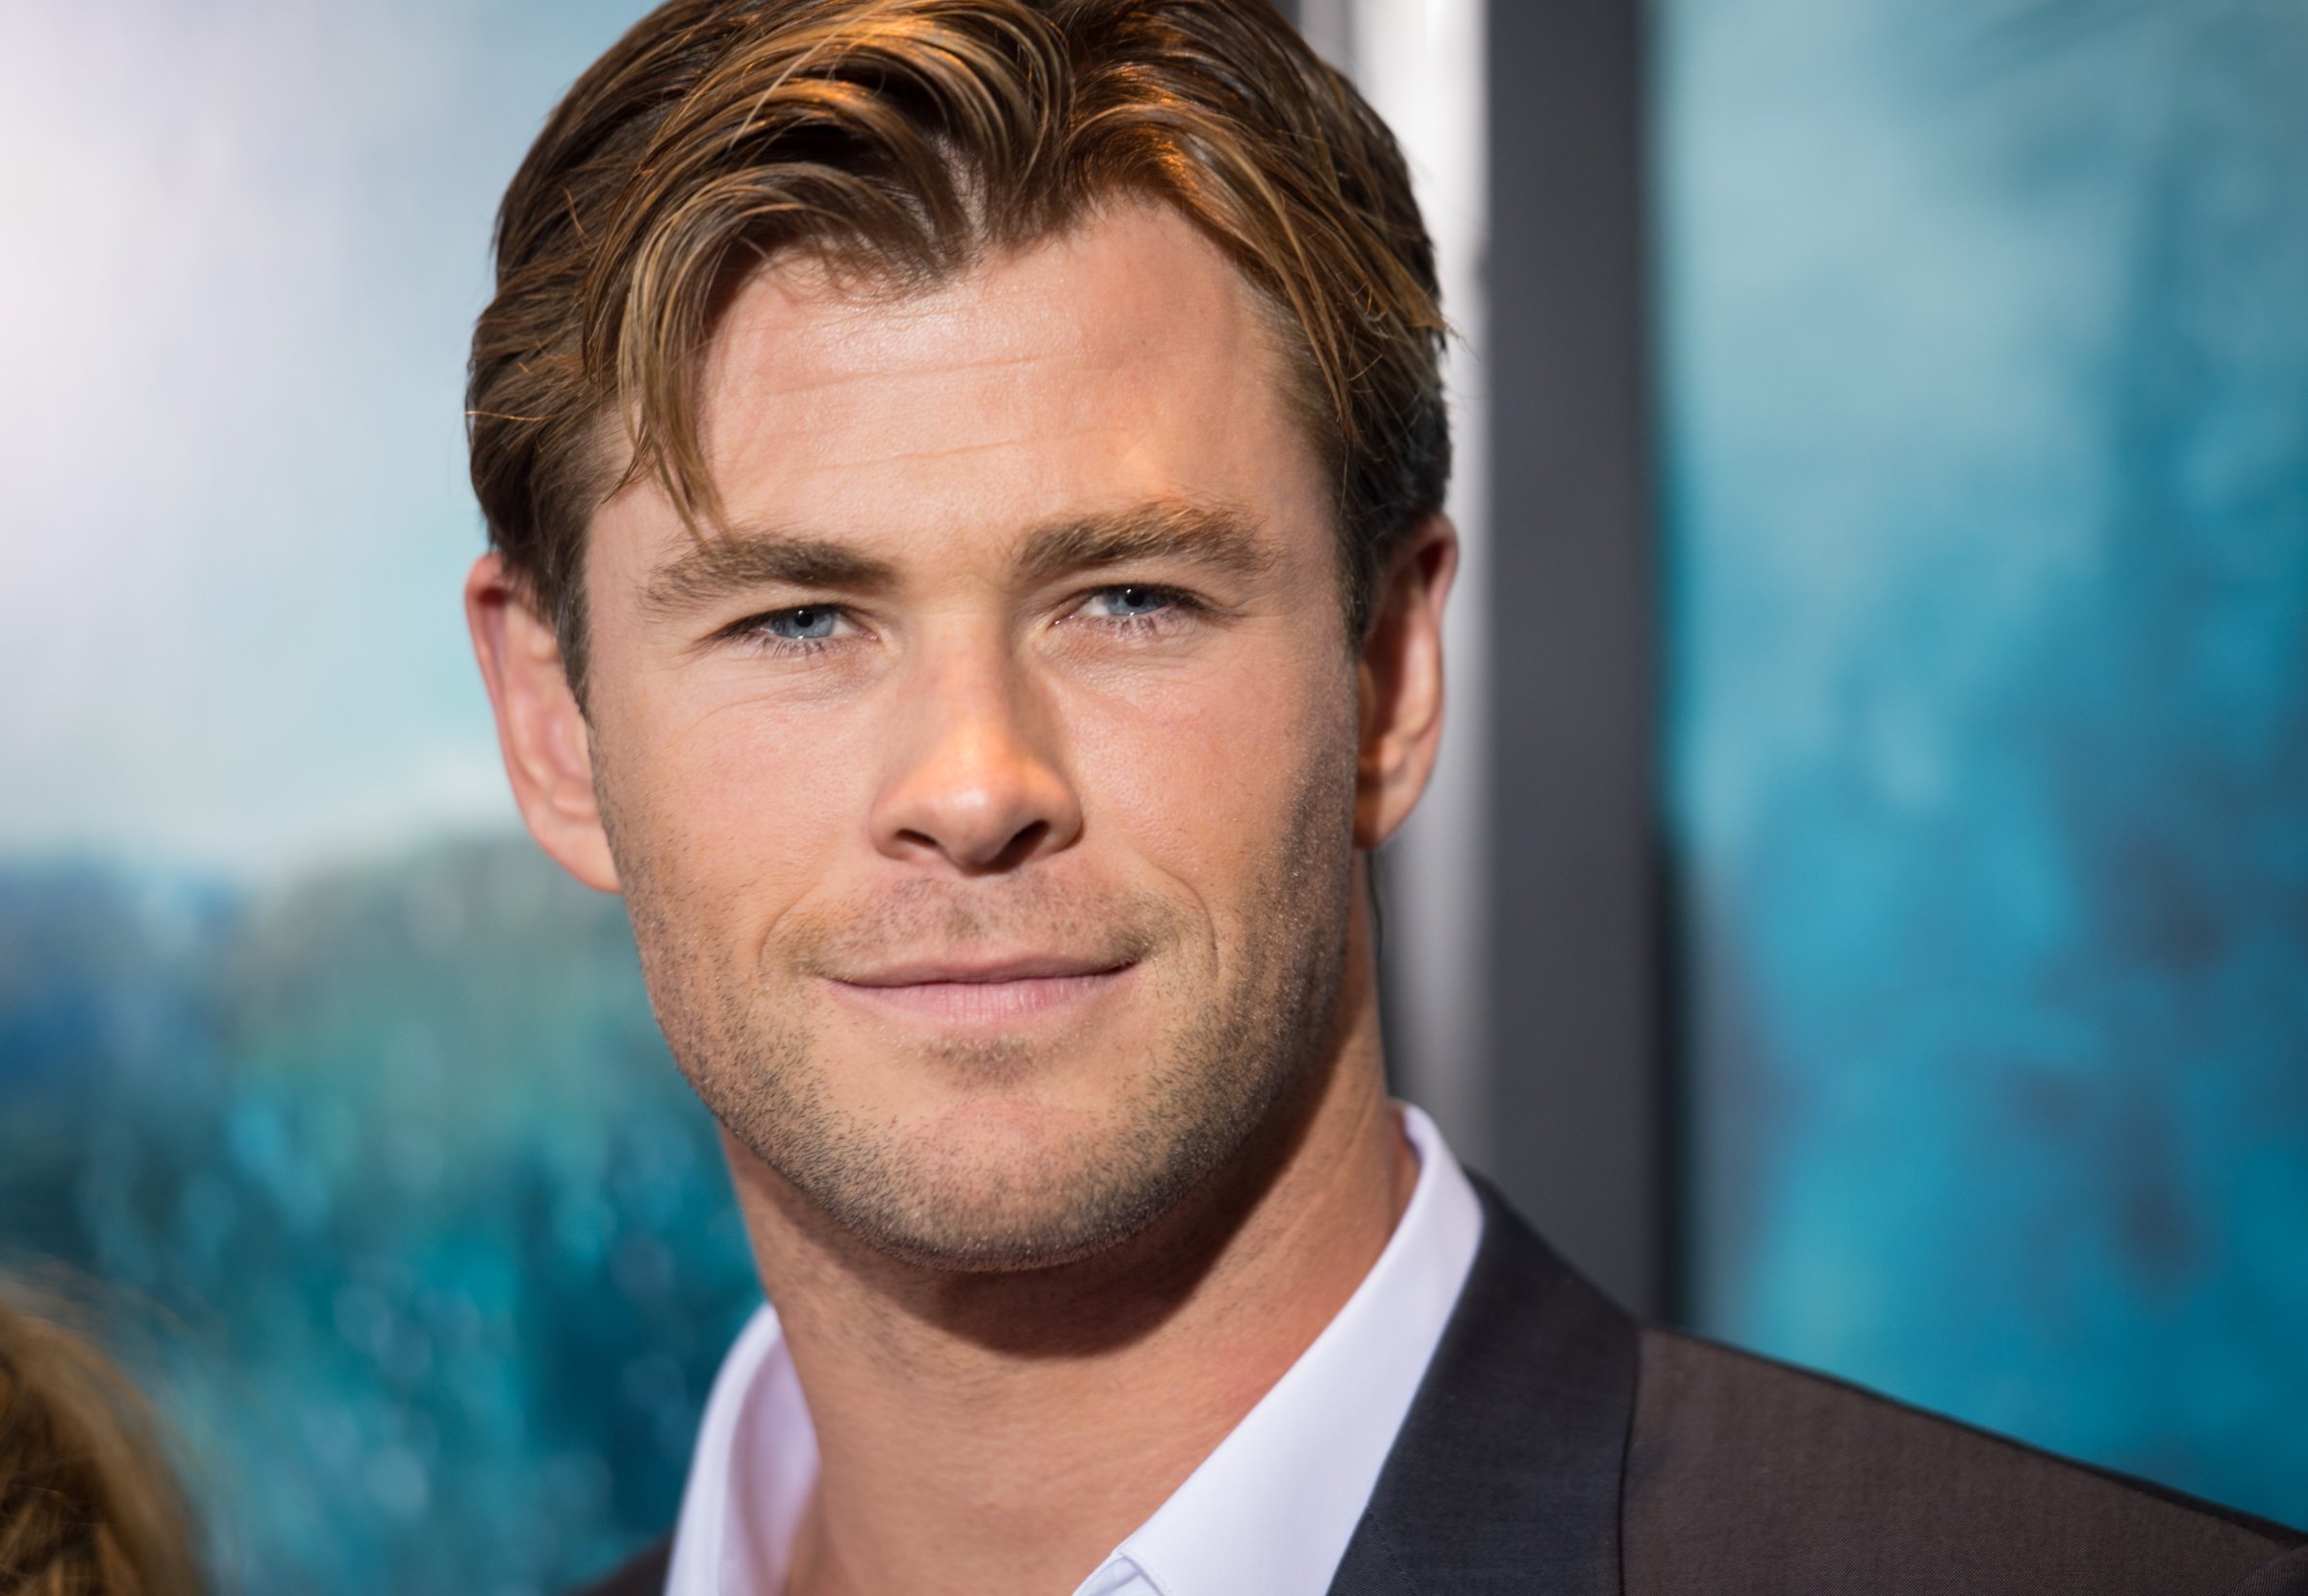 Chris Hemsworth arrive at the 'In The Heart Of The Sea' New York Premiere at Frederick P. Rose Hall, Jazz at Lincoln Center on December 7, 2015 in New York City.